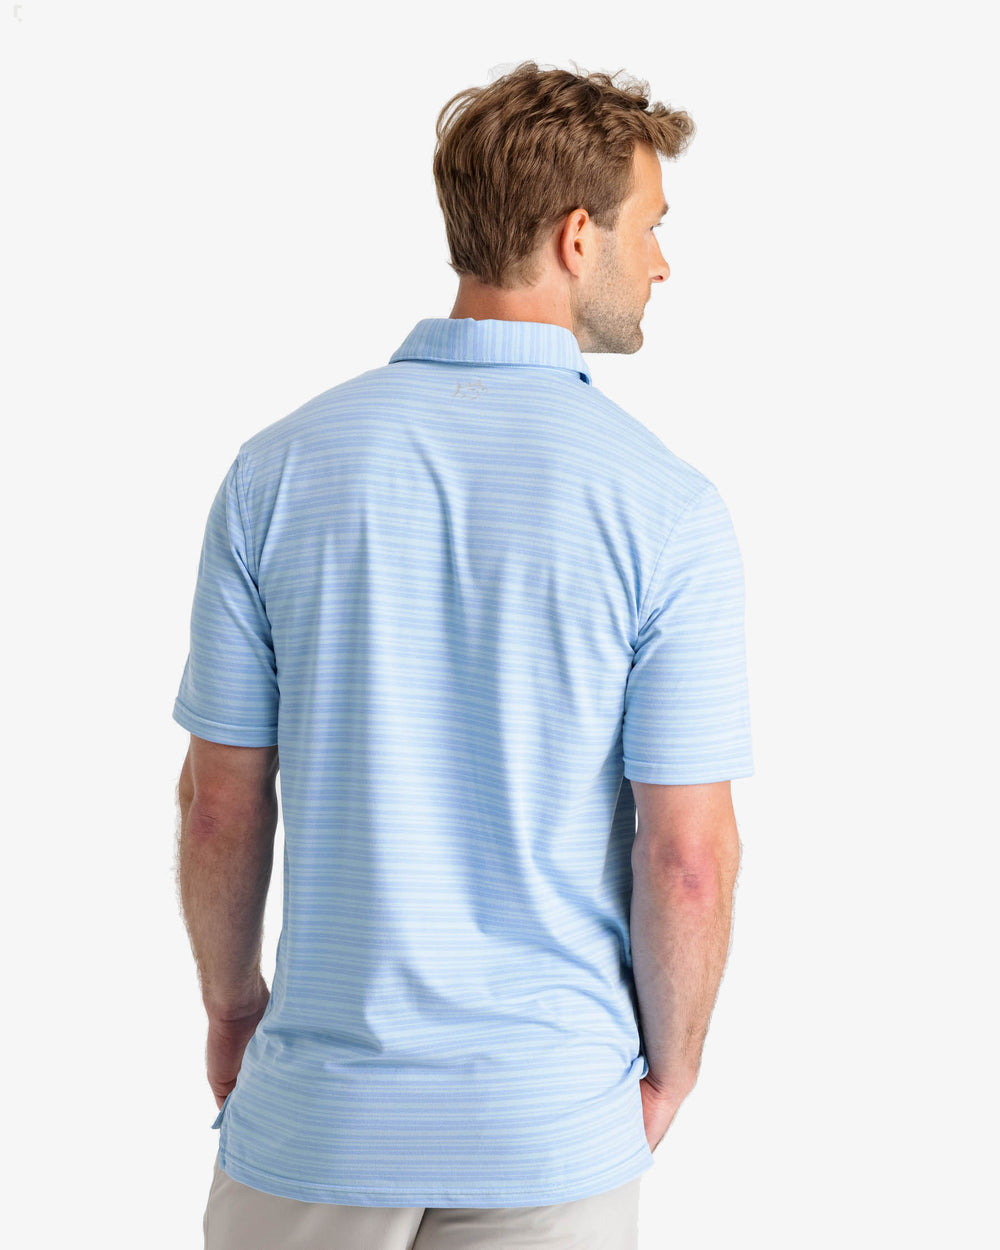 The back view of the Southern Tide Ryder Heather Bombay Striped Polo Shirt by Southern Tide - Heather Boat Blue